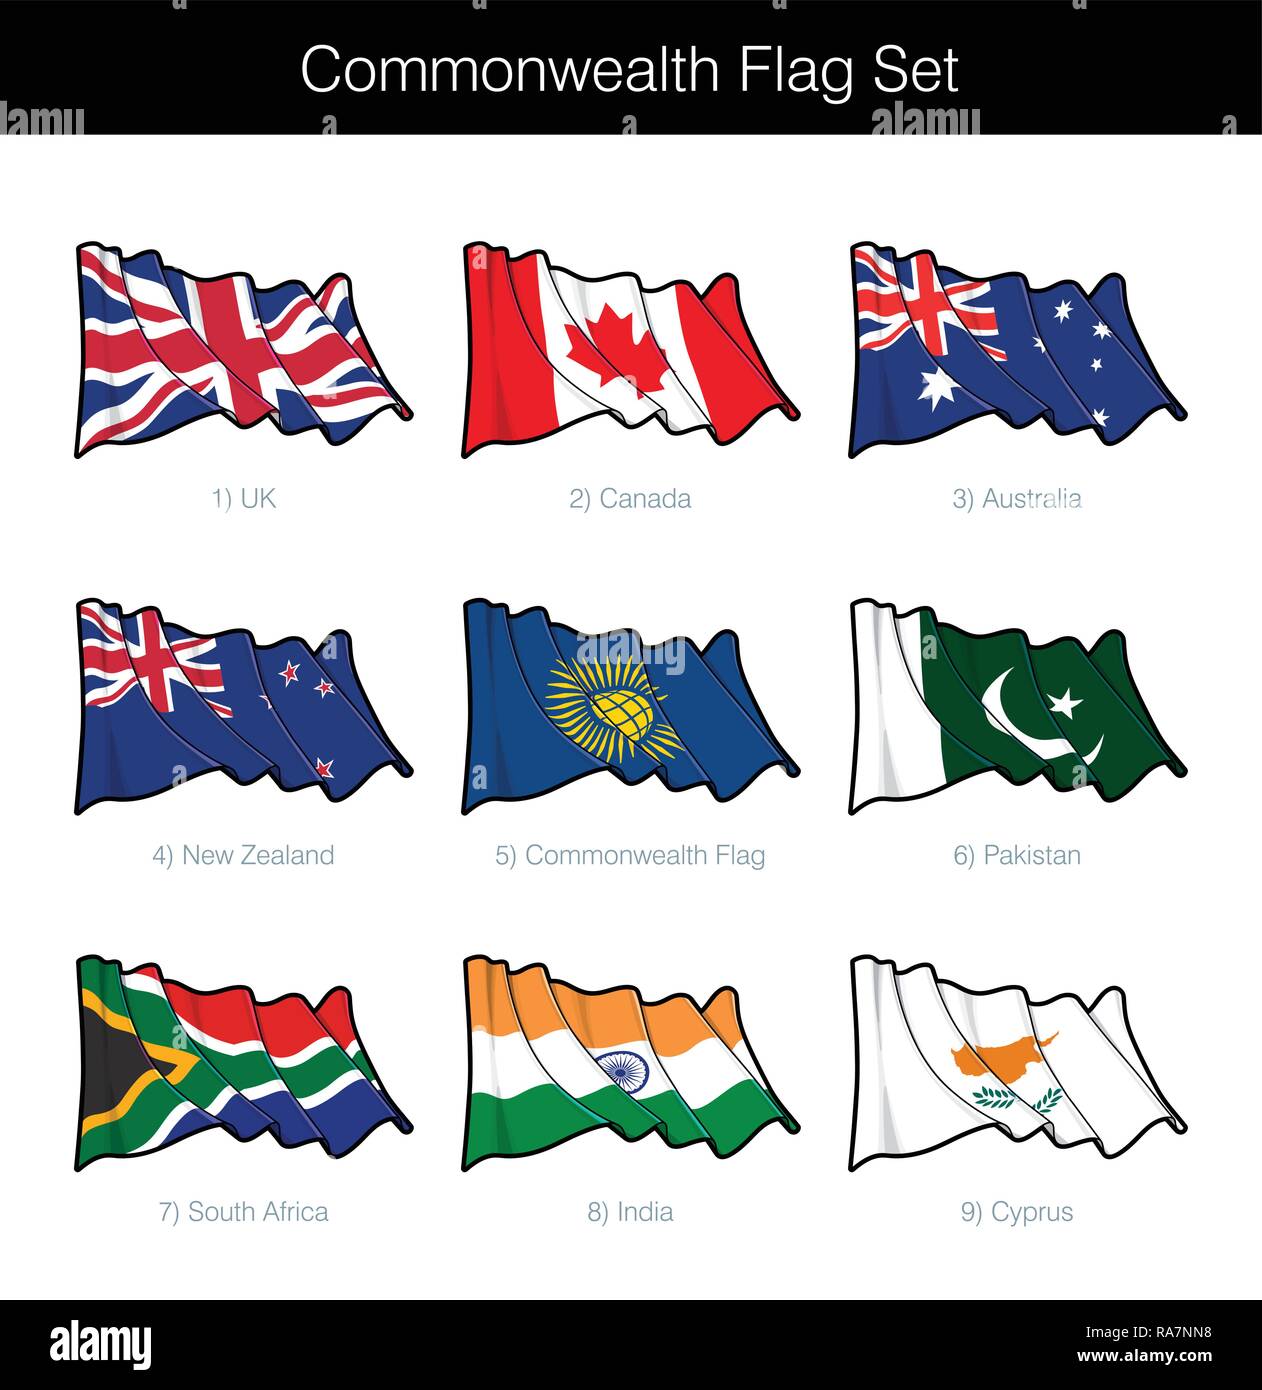 Commonwealth Waving Flag Set. The set includes the flags of UK, Canada, Australia, New Zealand, Pakistan, India, South Africa, Cyprus and the Commonwe Stock Vector